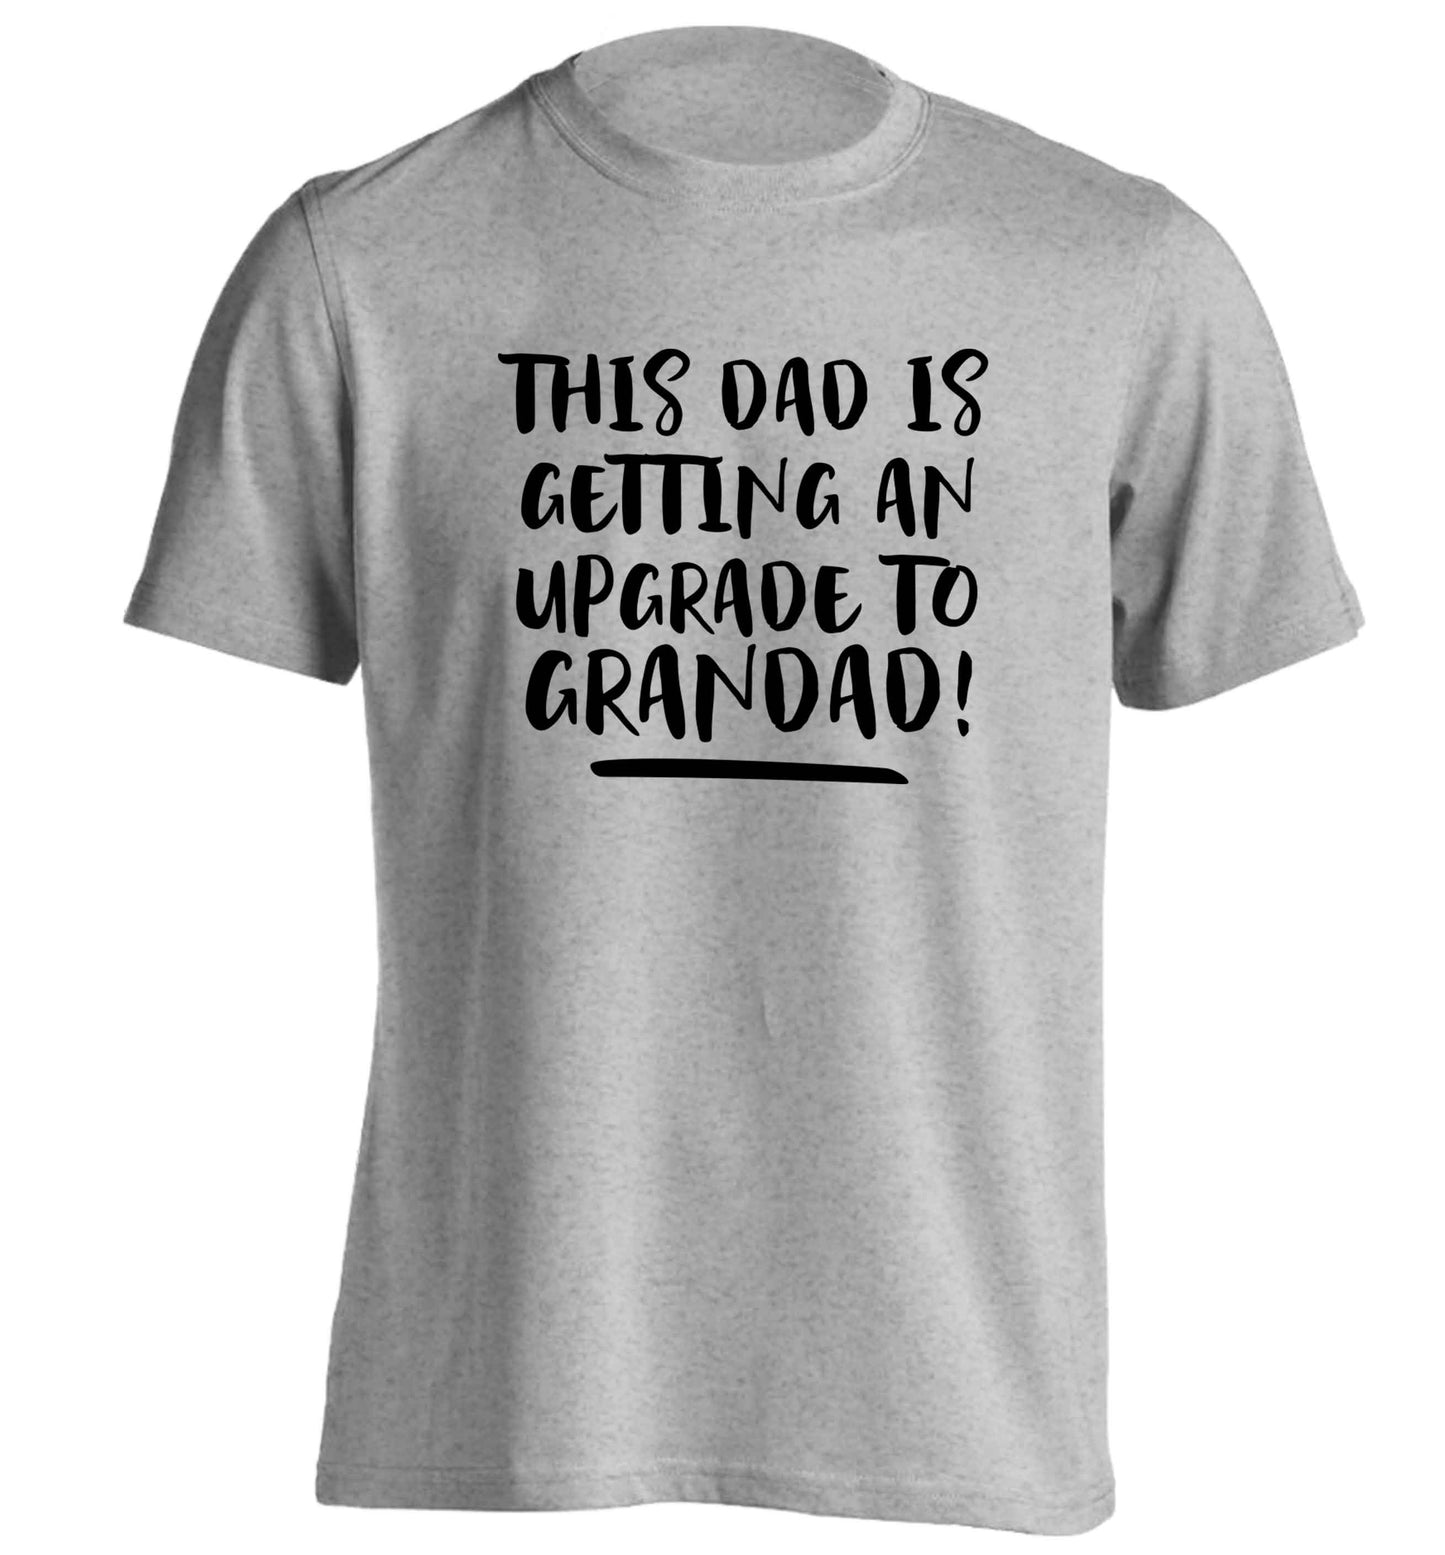 This dad is getting an upgrade to grandad! adults unisex grey Tshirt 2XL